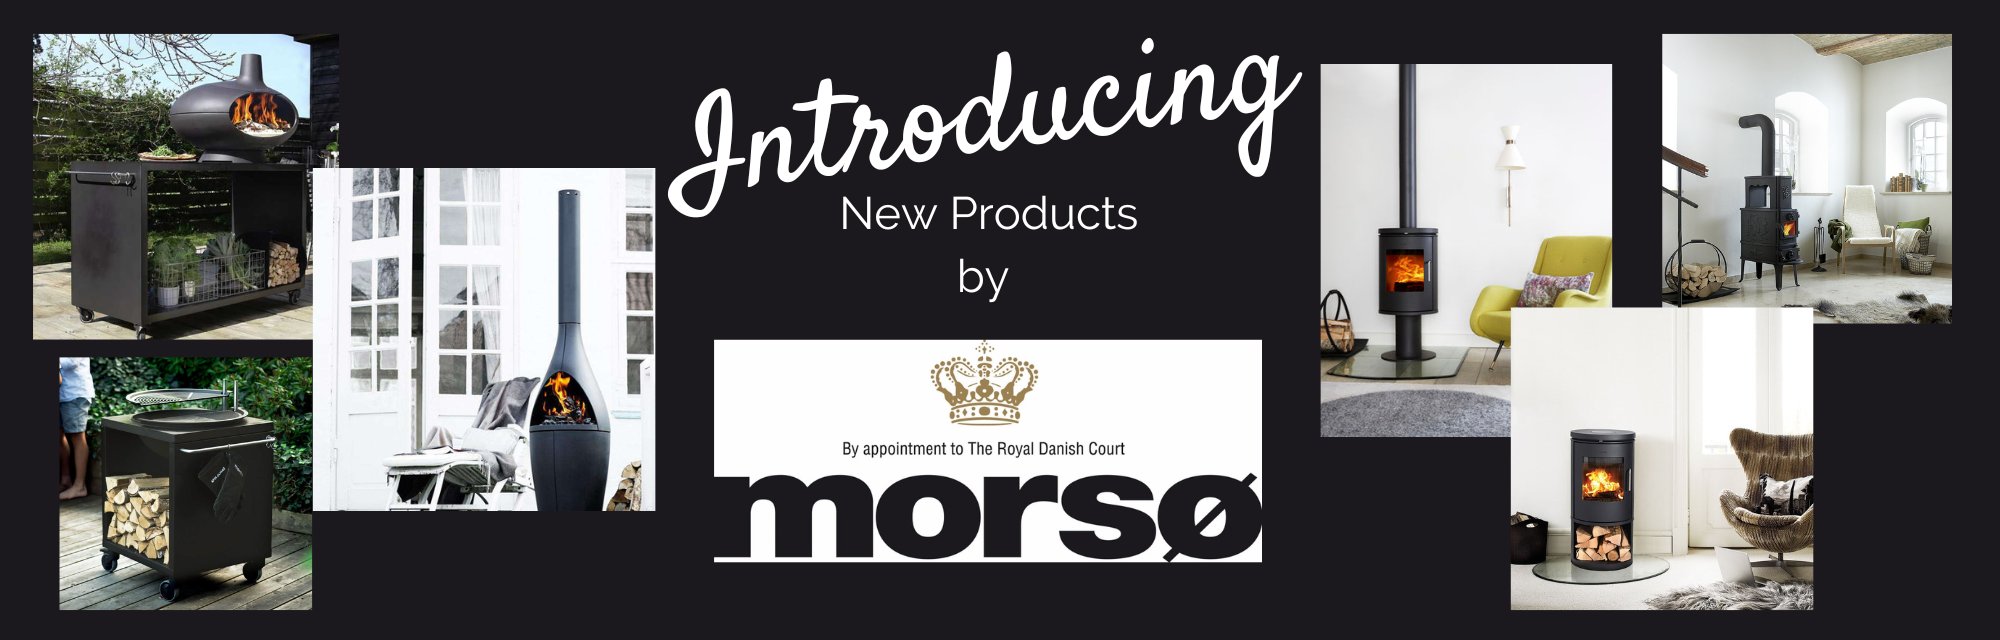 Introducing Morso Wood Stove and Outdoor Products